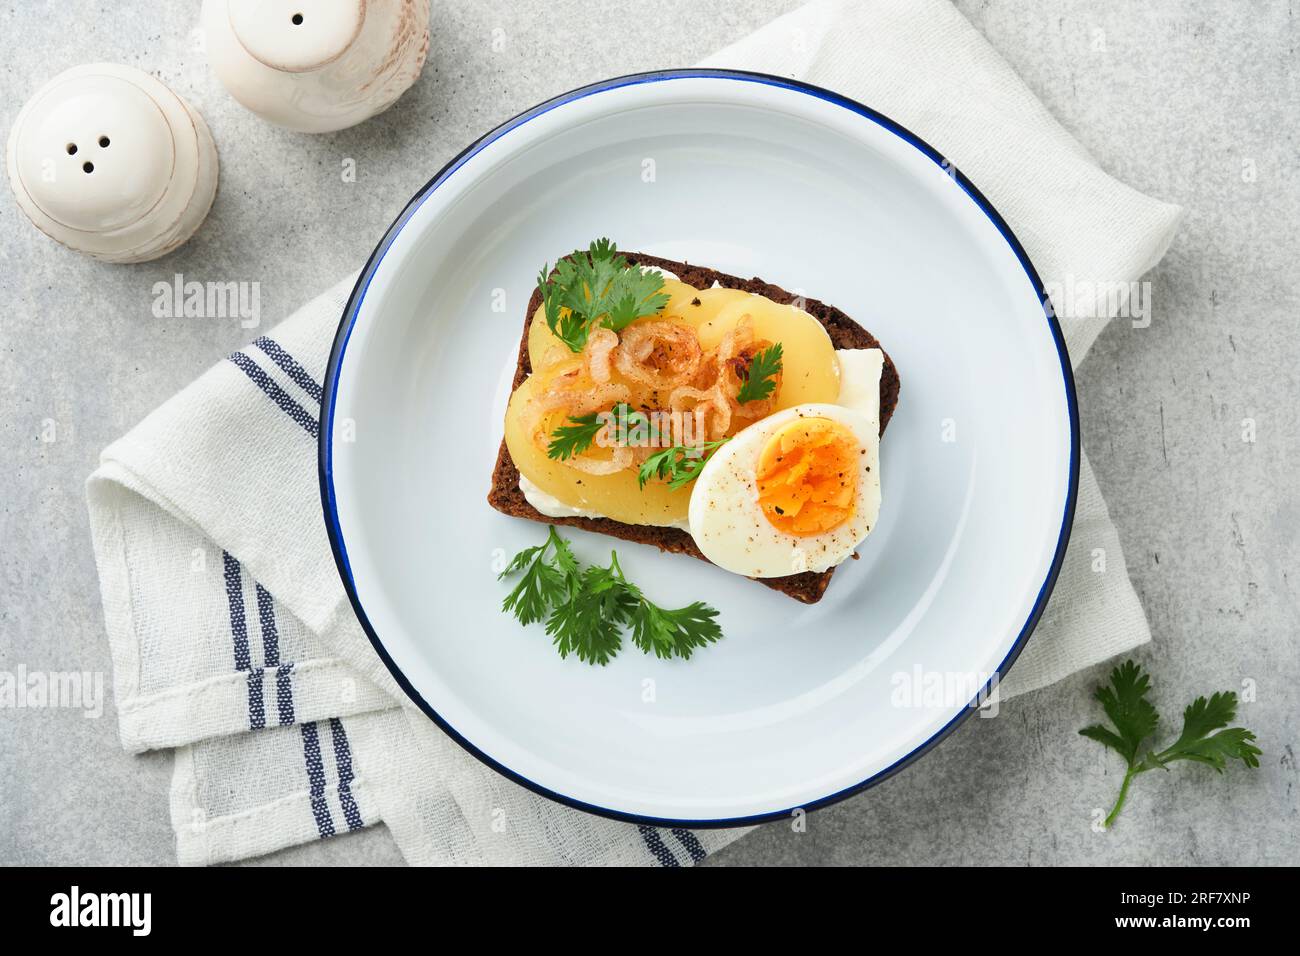 Open sandwich or smorrebrod with rye bread, herring, eggs, caramelized onions, parsley and cottage cheese on old wooden rustic table backgrounds. Dani Stock Photo